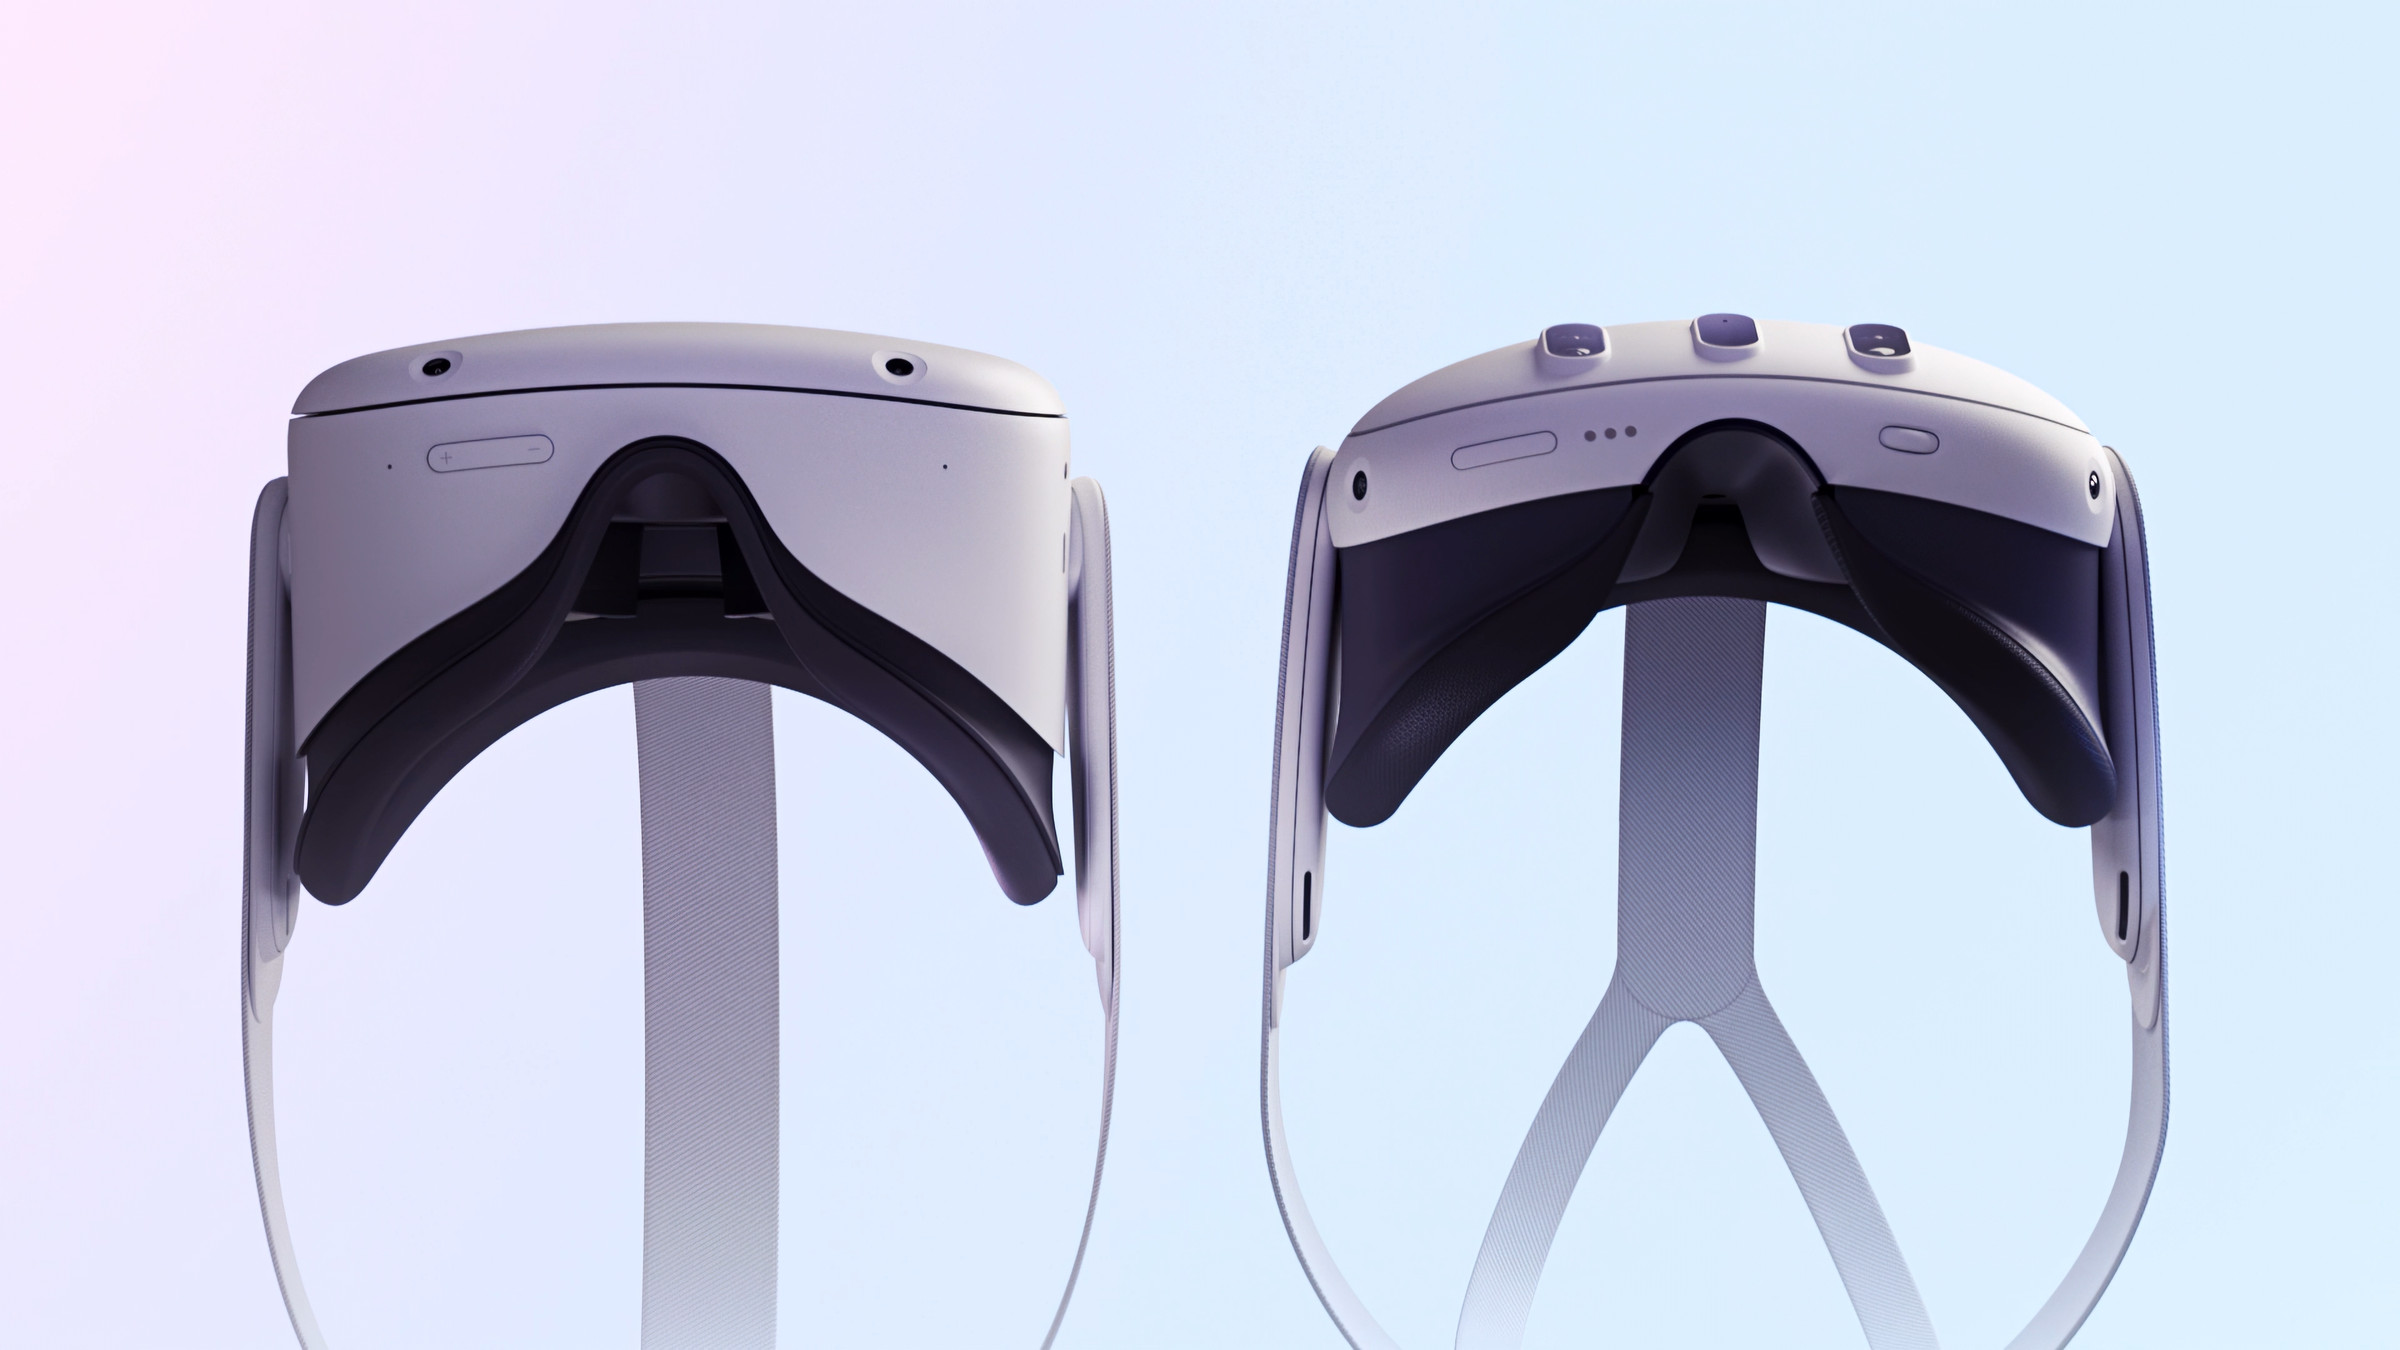 Side-by-side view from the bottom of both the Meta Quest 2 and Quest 3 headsets showing the new version’s slimmer design.